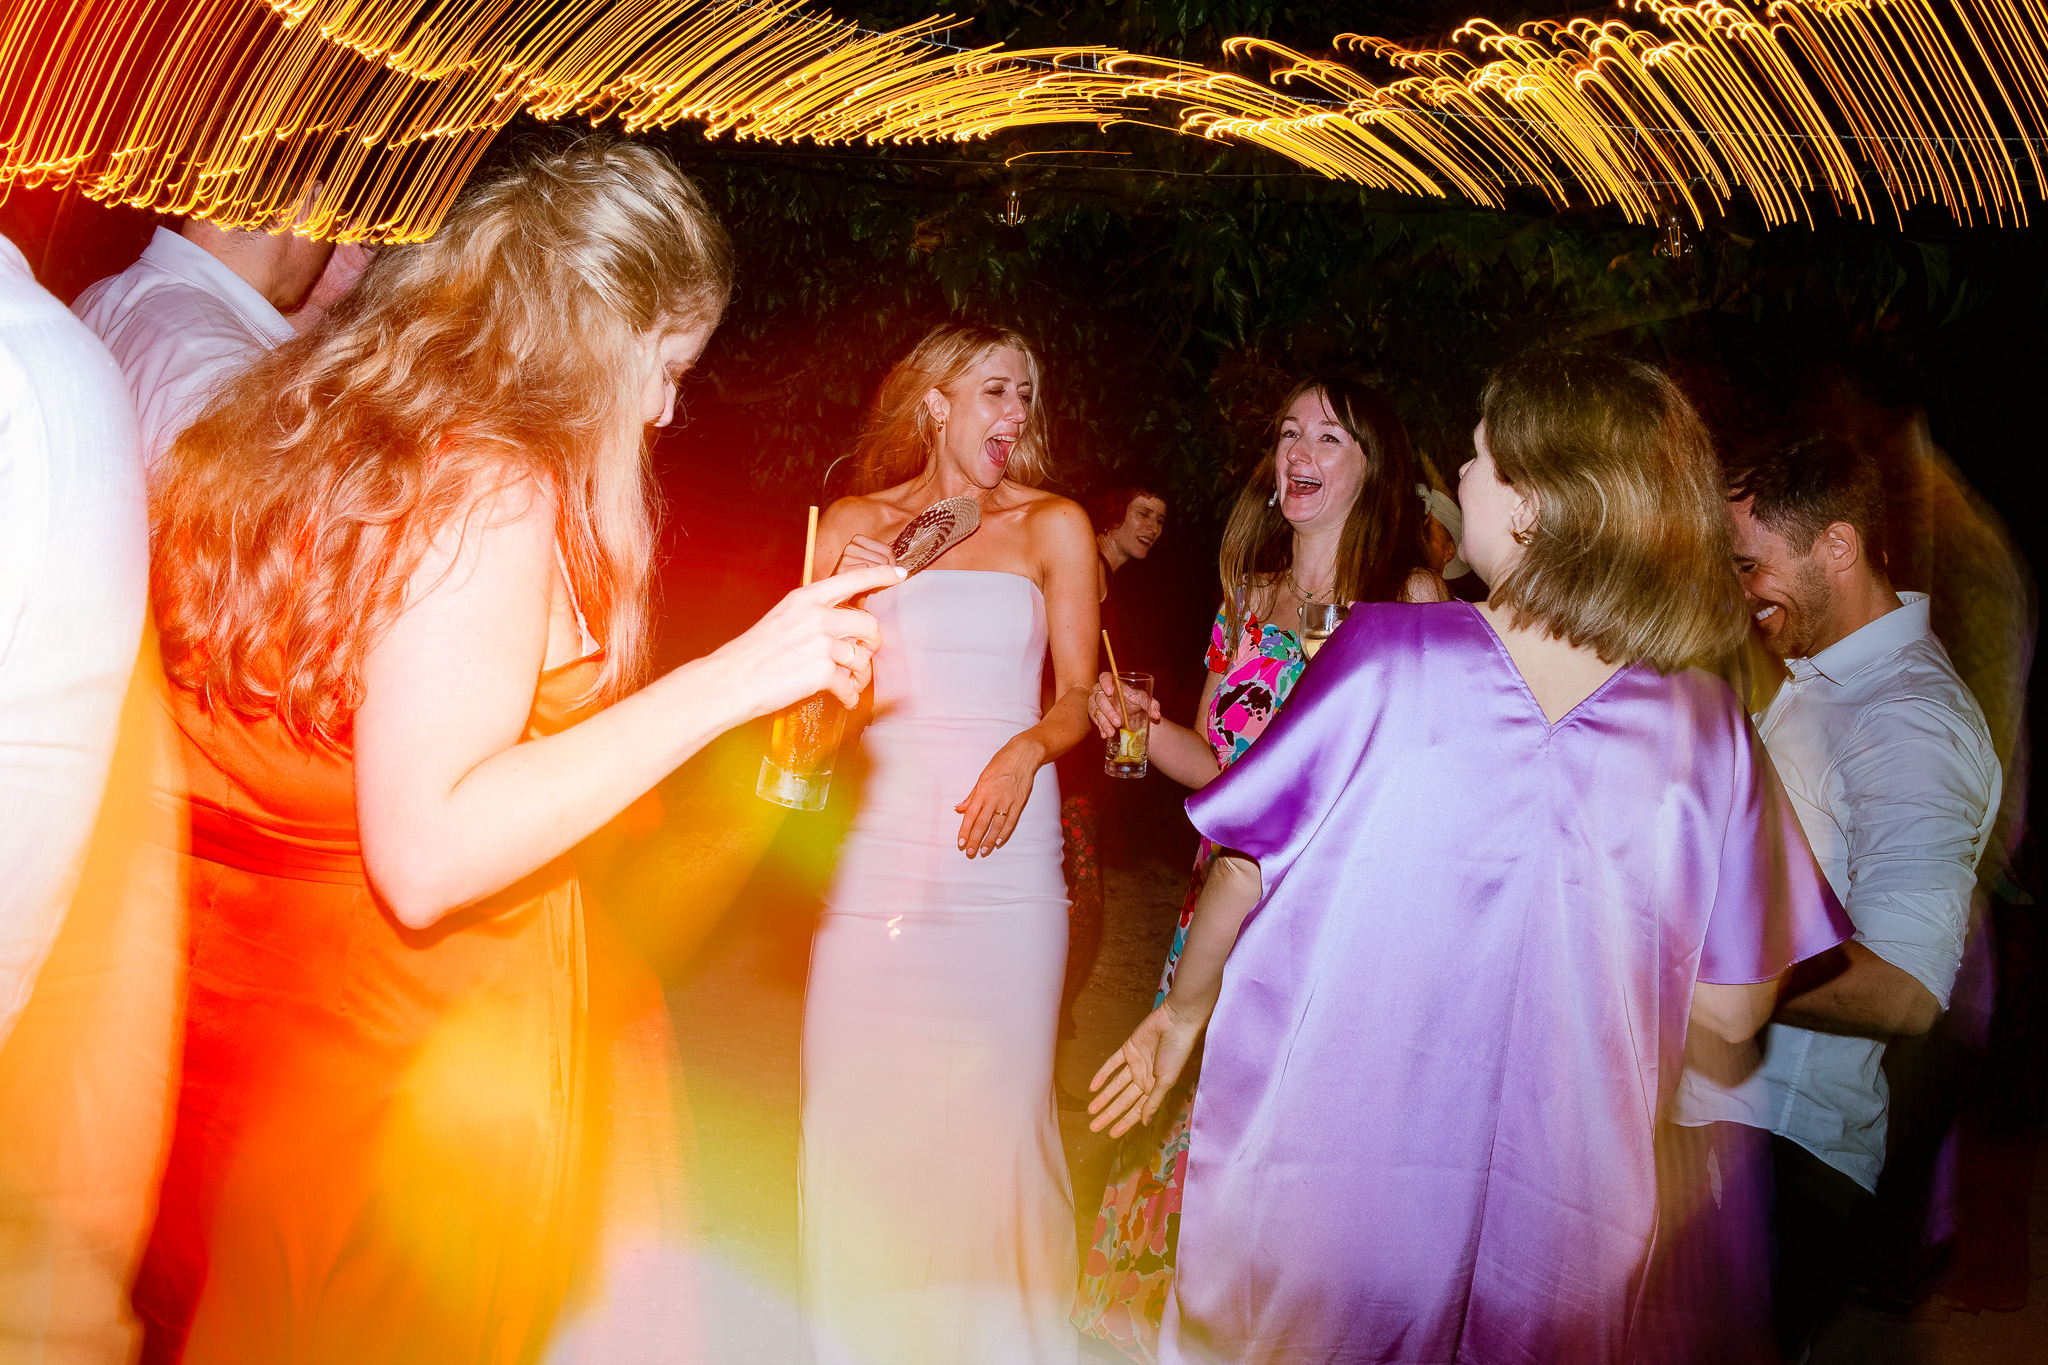 Bride laughs and dances with guests at a wedding reception